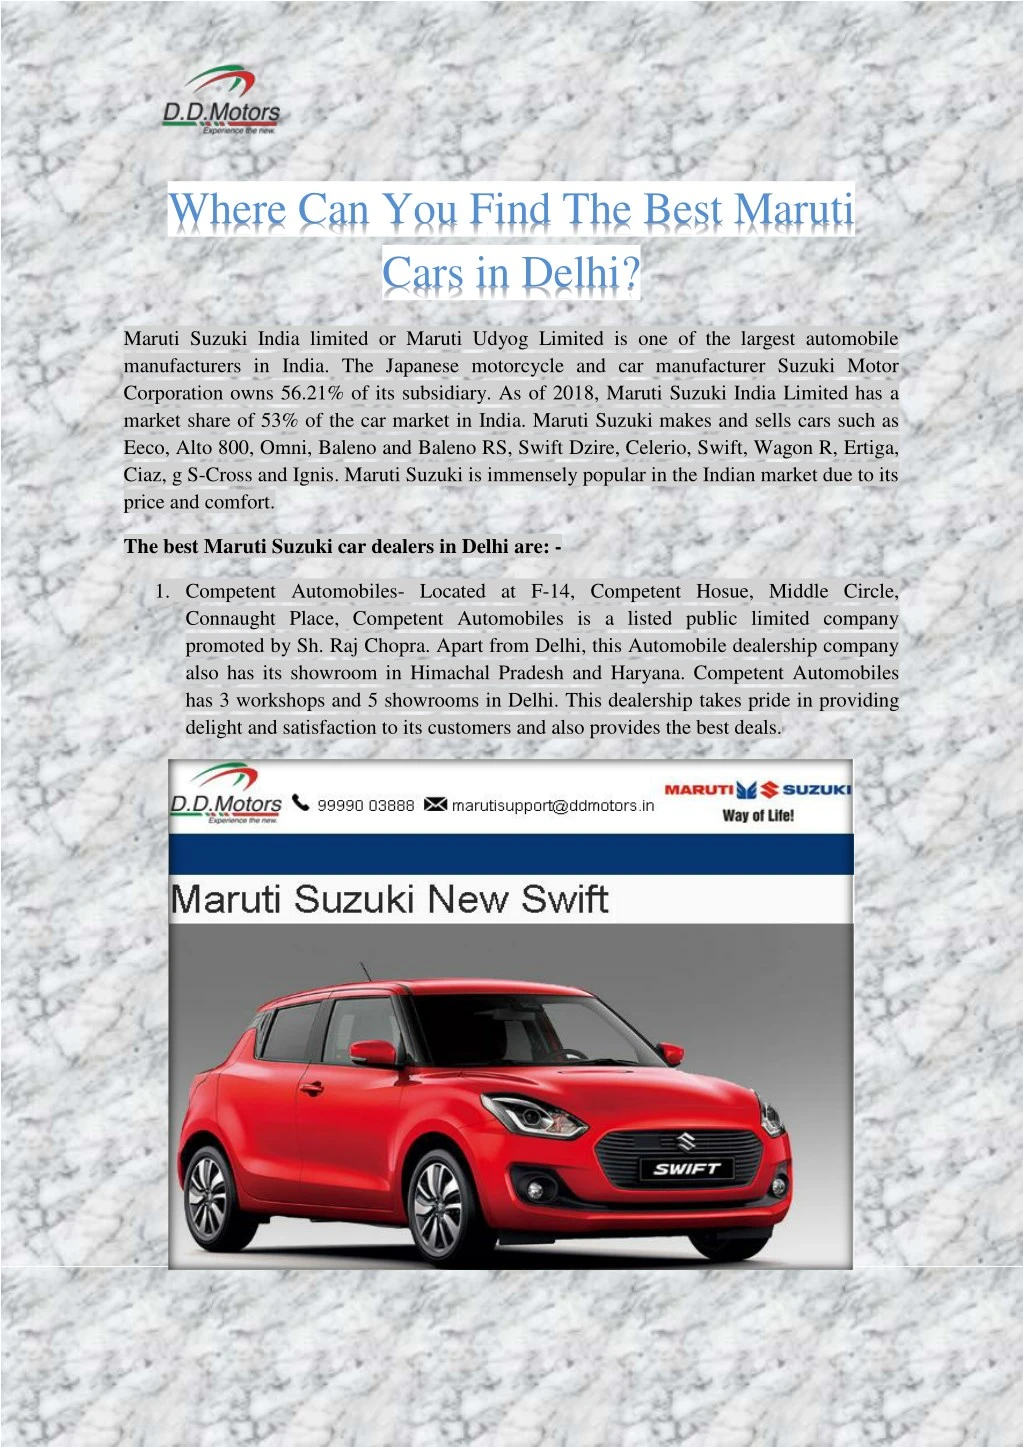 where can you find the best maruti cars in delhi